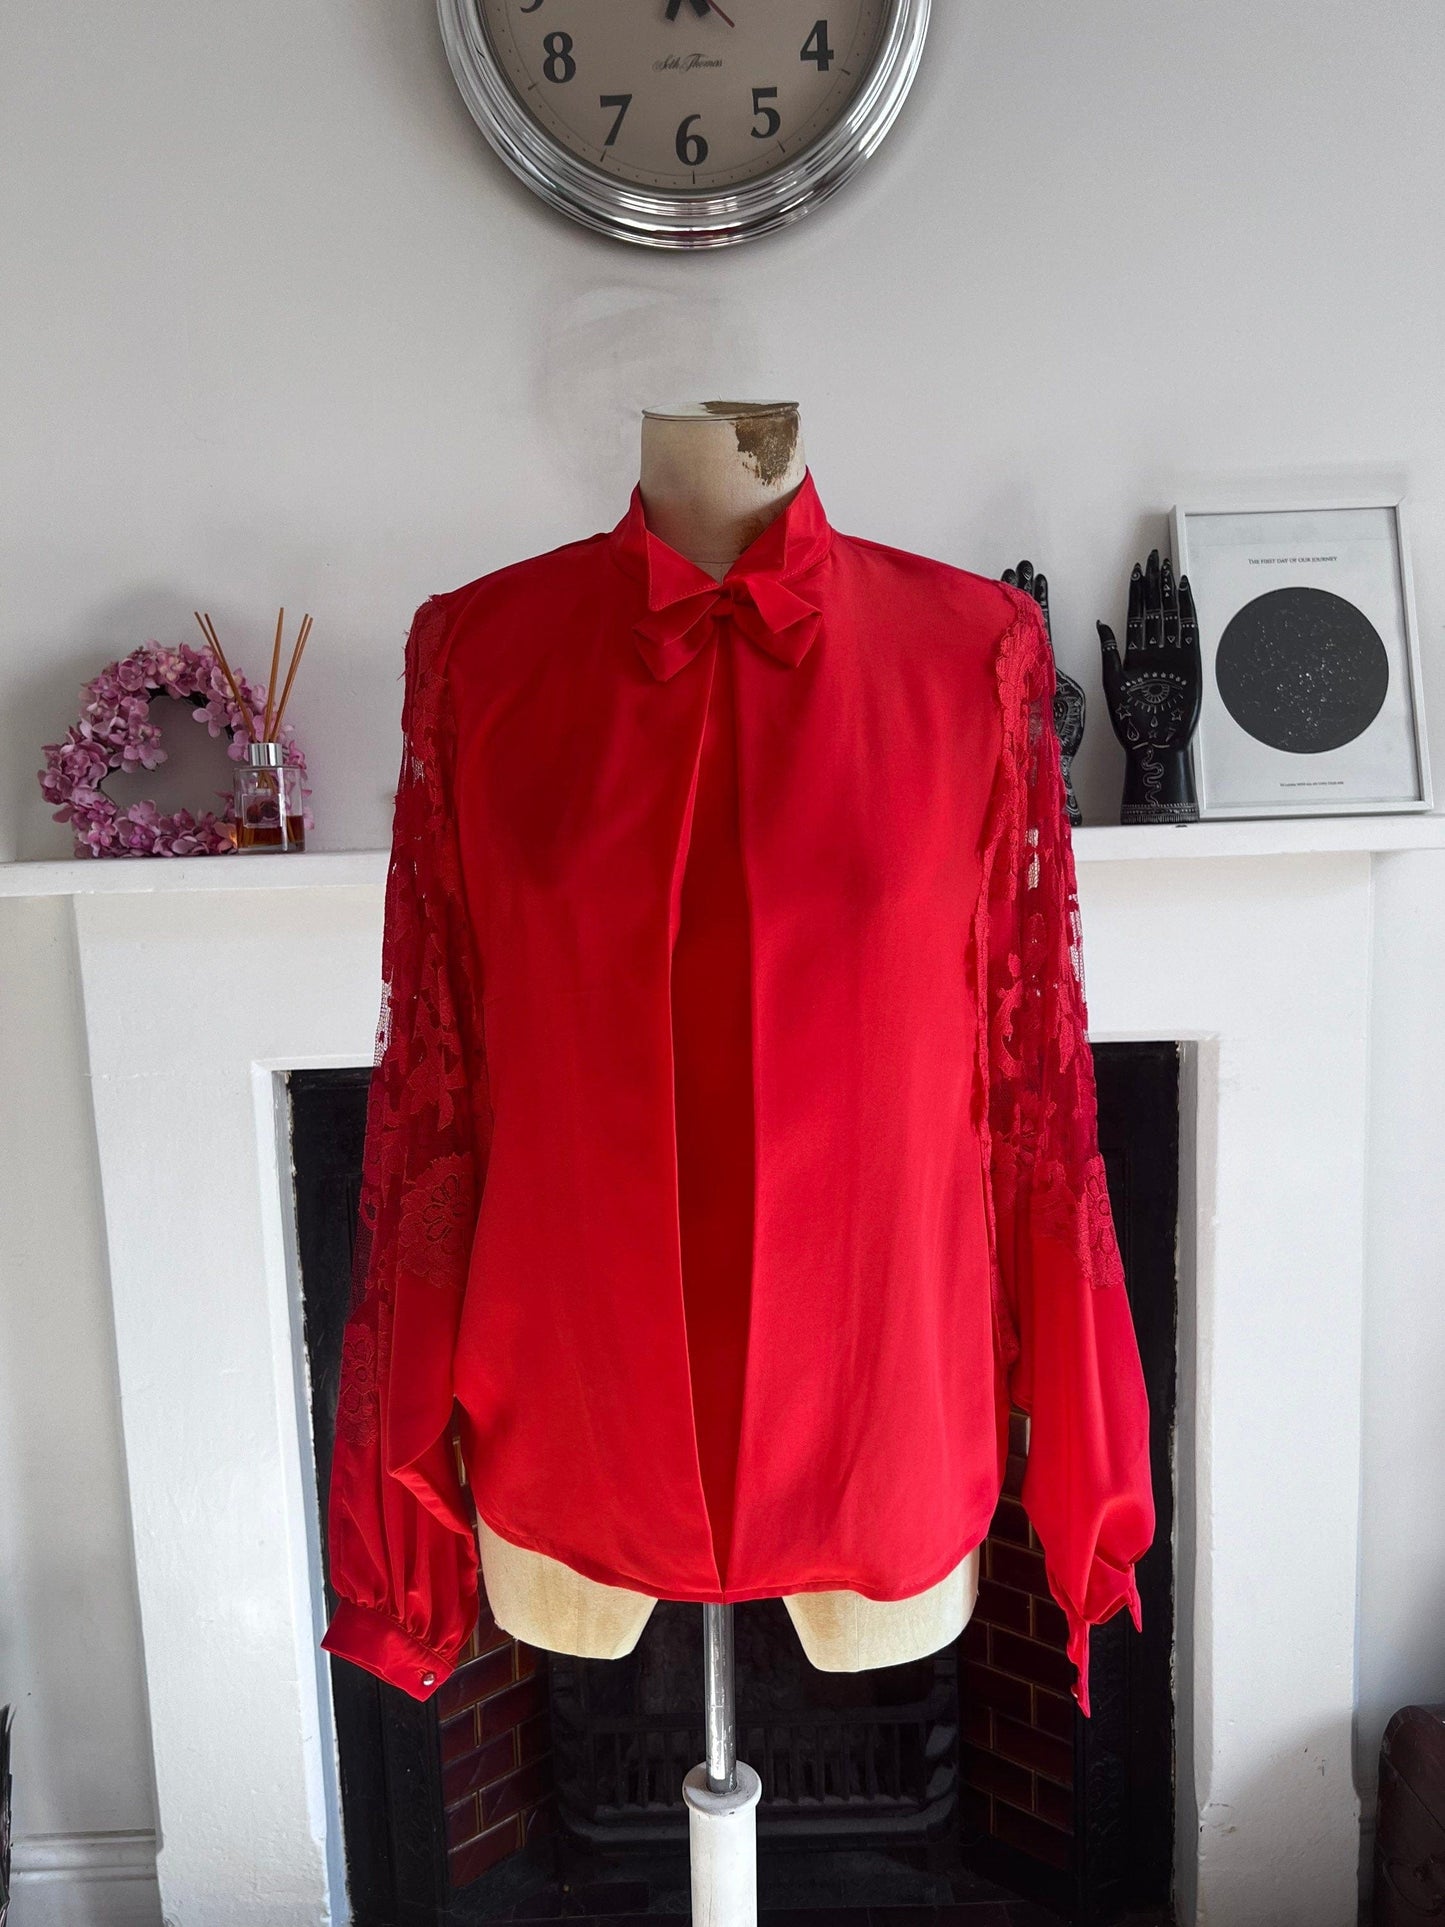 Vintage Red Blouse Batwing - Lace sleeves Pleat Front high neck Semi Sheer Shirt - UKM